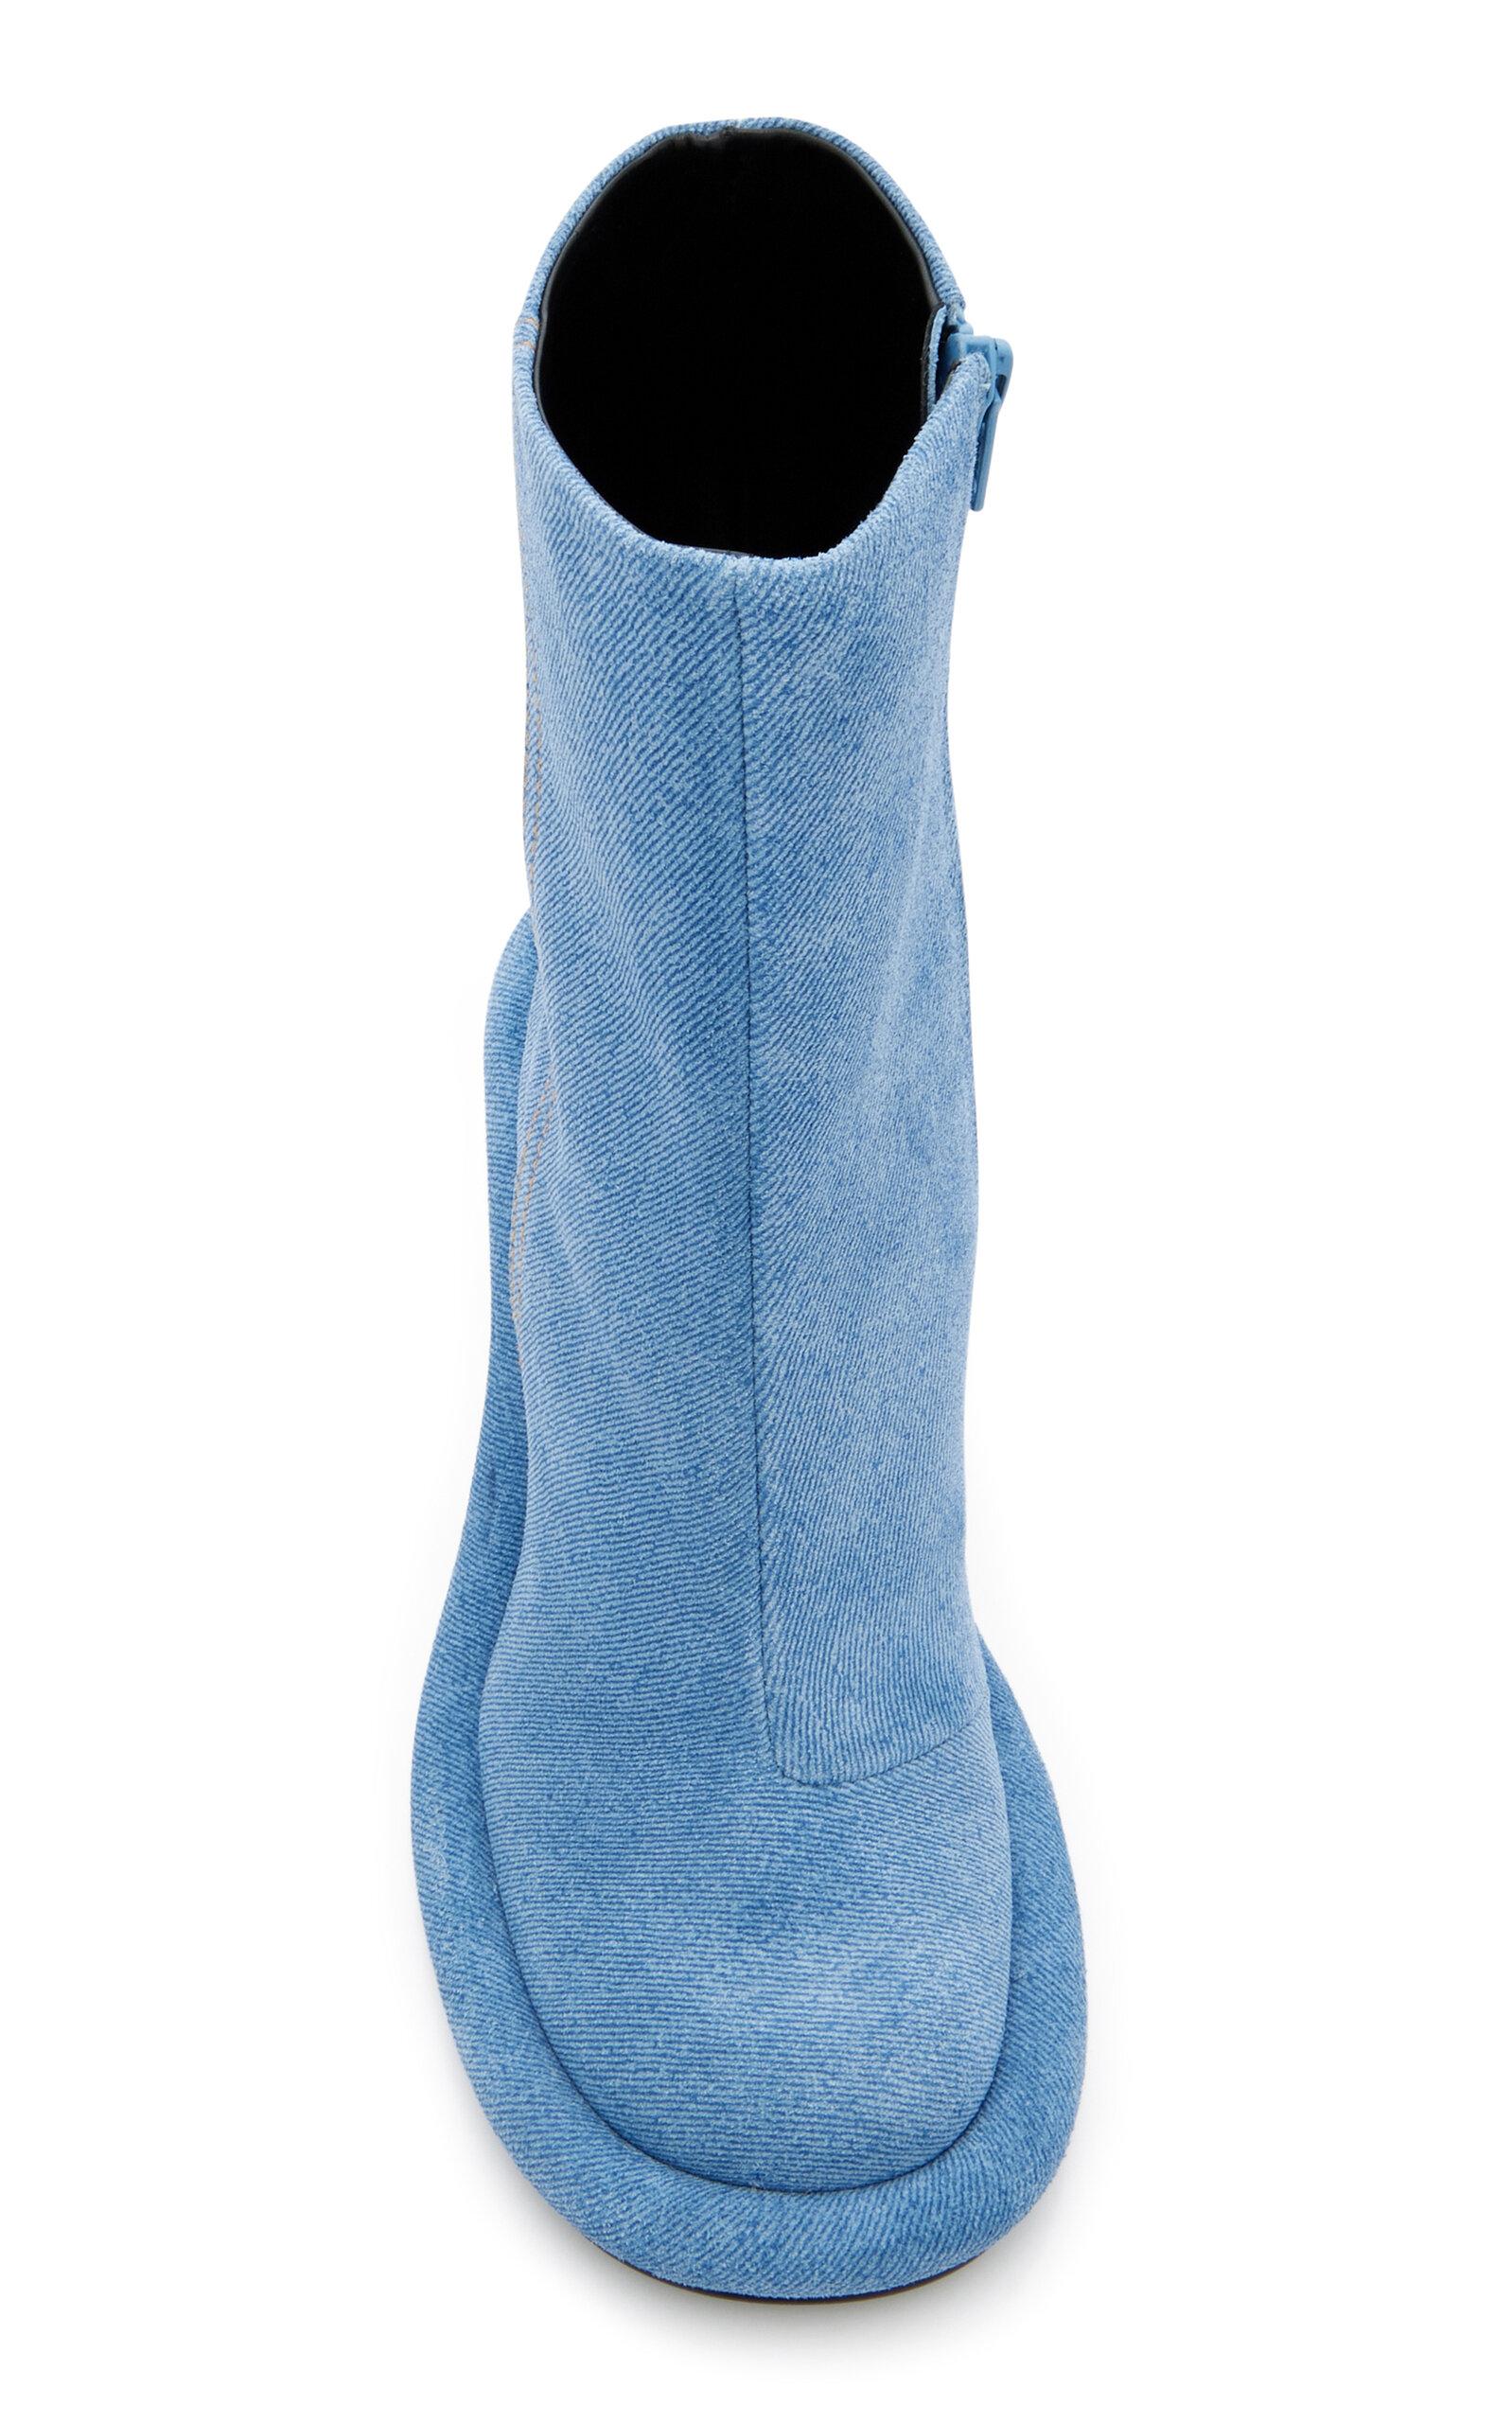 JW Anderson Bumper Suede Ankle Boots in Blue | Lyst